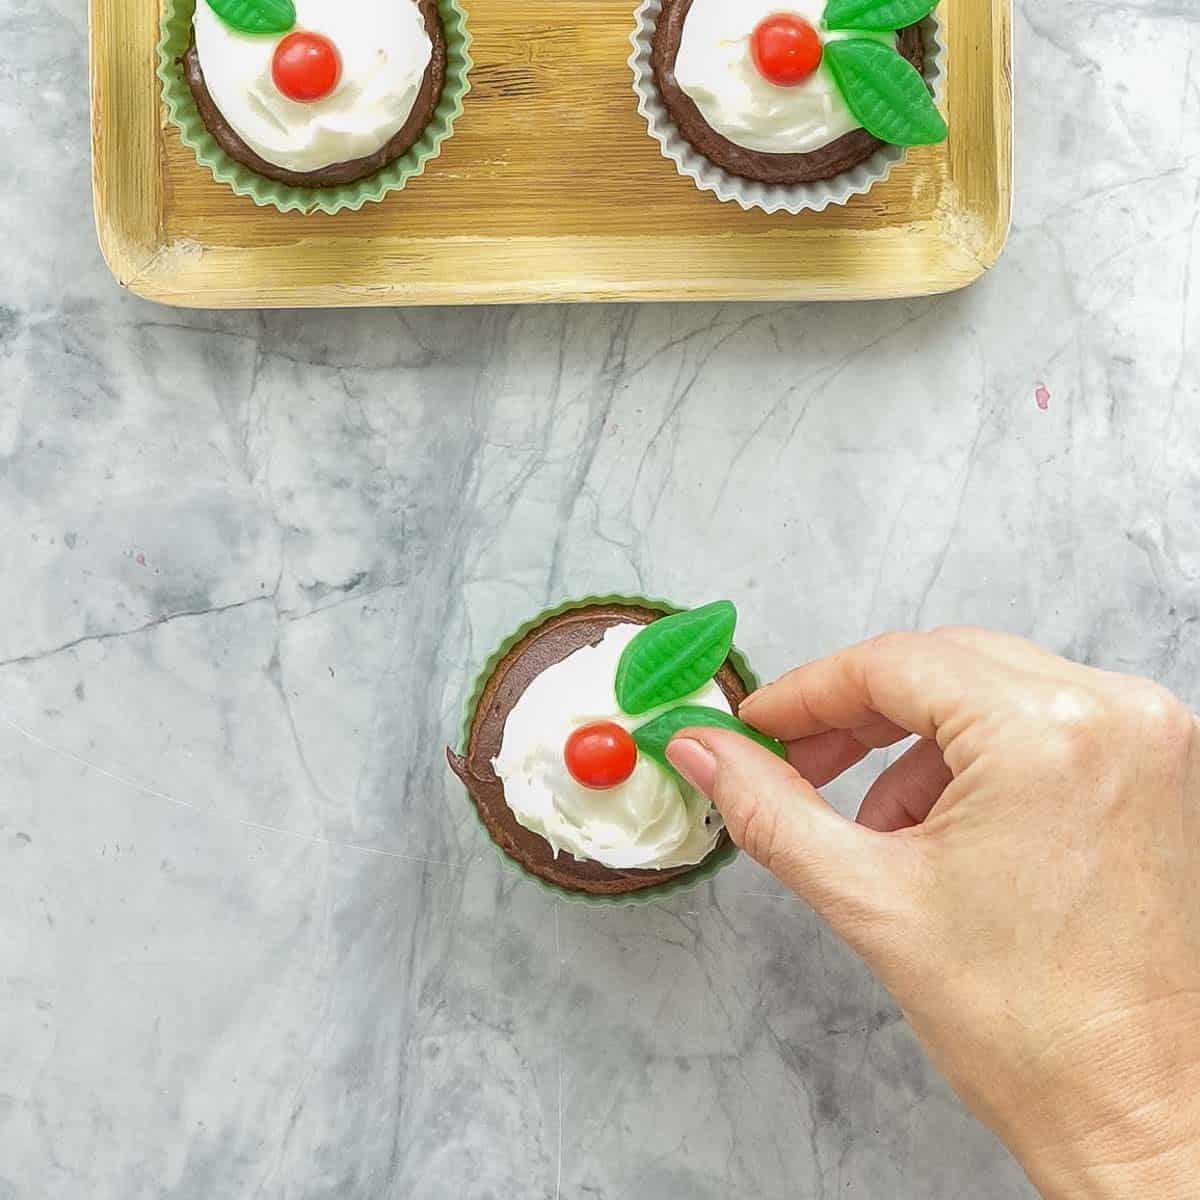 Decorate the frosted cupcake with 1 Jaffa (or red ball-shaped sweet) and 1-2 spearmint leaves to look like a sprig of holly